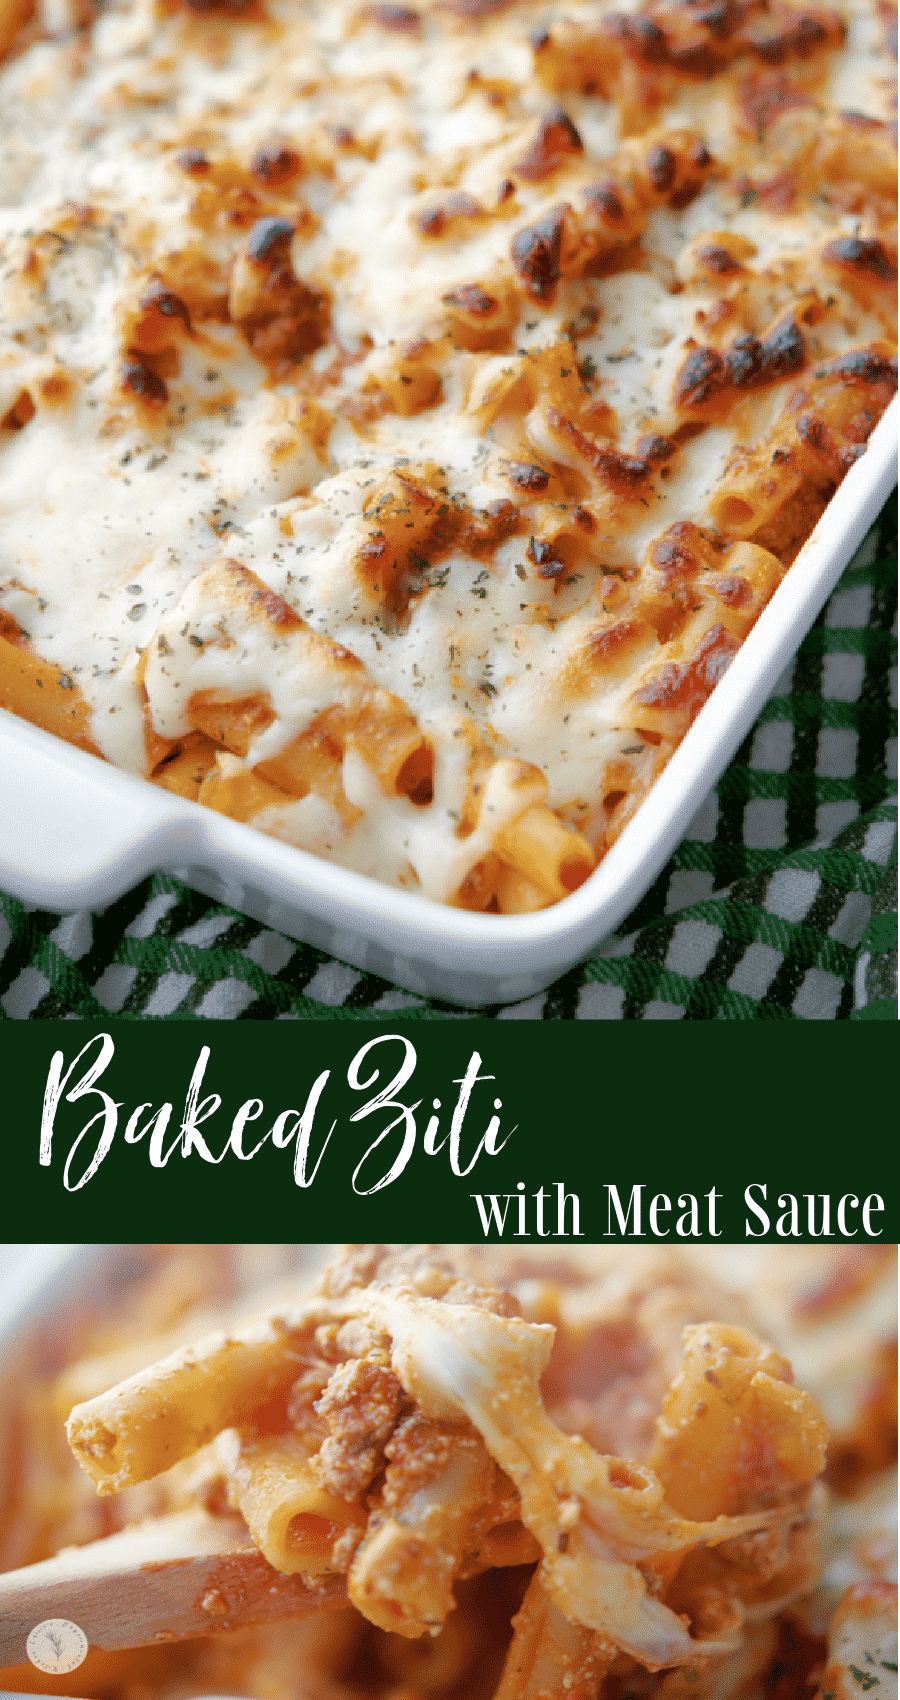 Baked Ziti with Meat Sauce | Carrie’s Experimental Kitchen